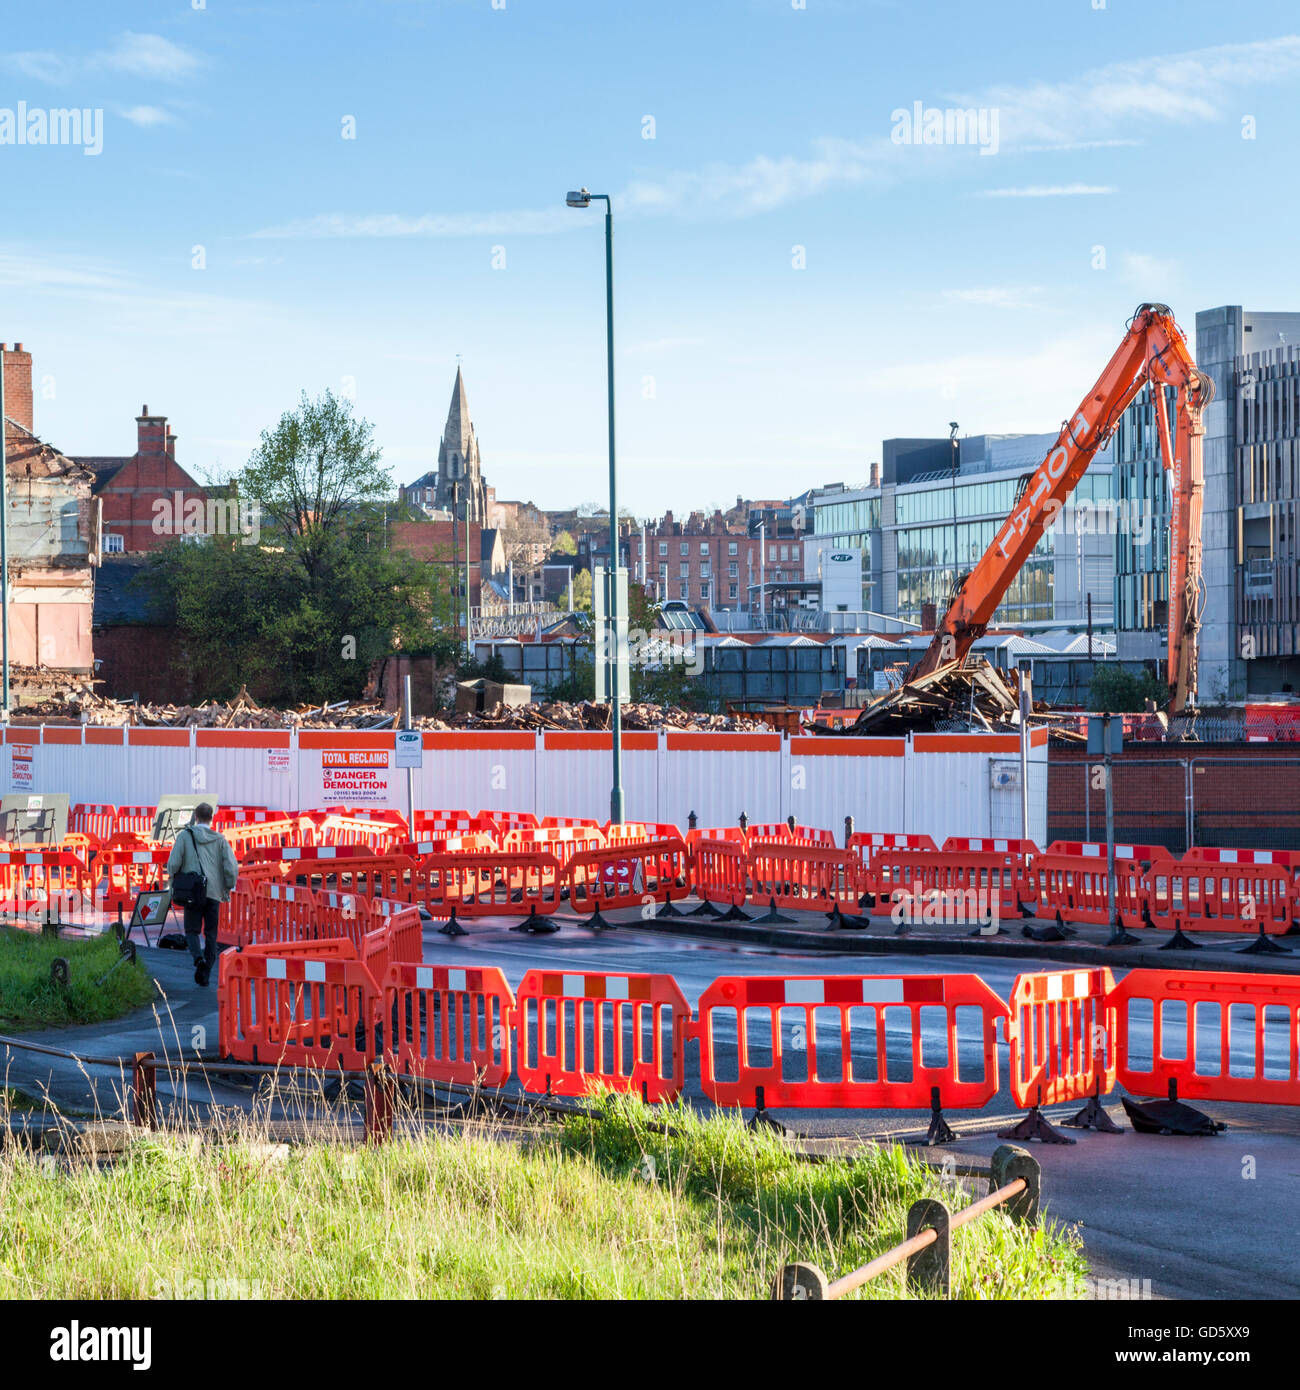 Chapter 8 temporary road safety barriers near demolition work, Nottingham, England, UK Stock Photo